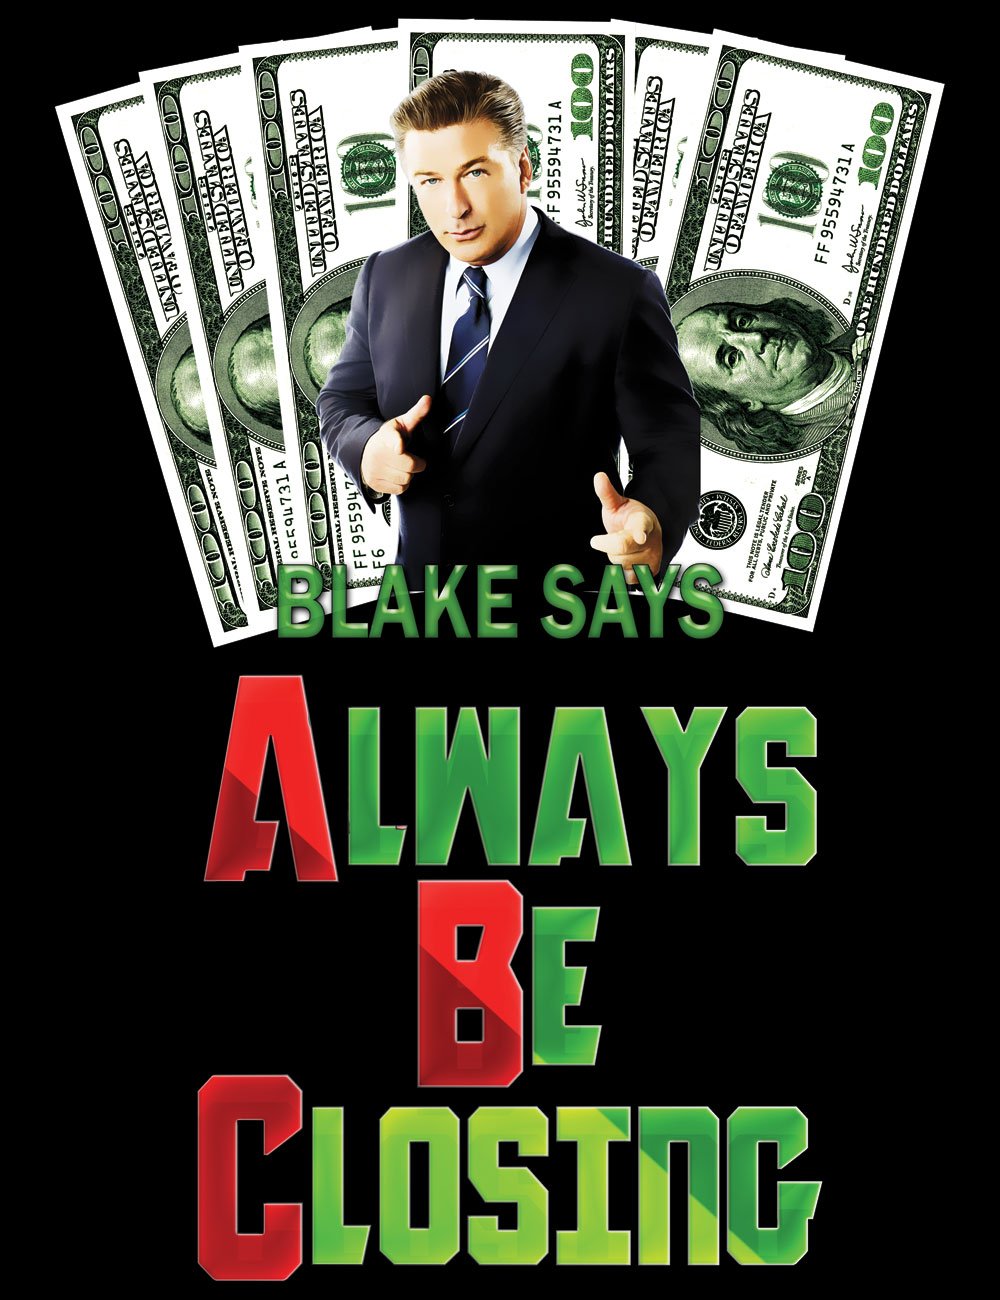 always be closing poster